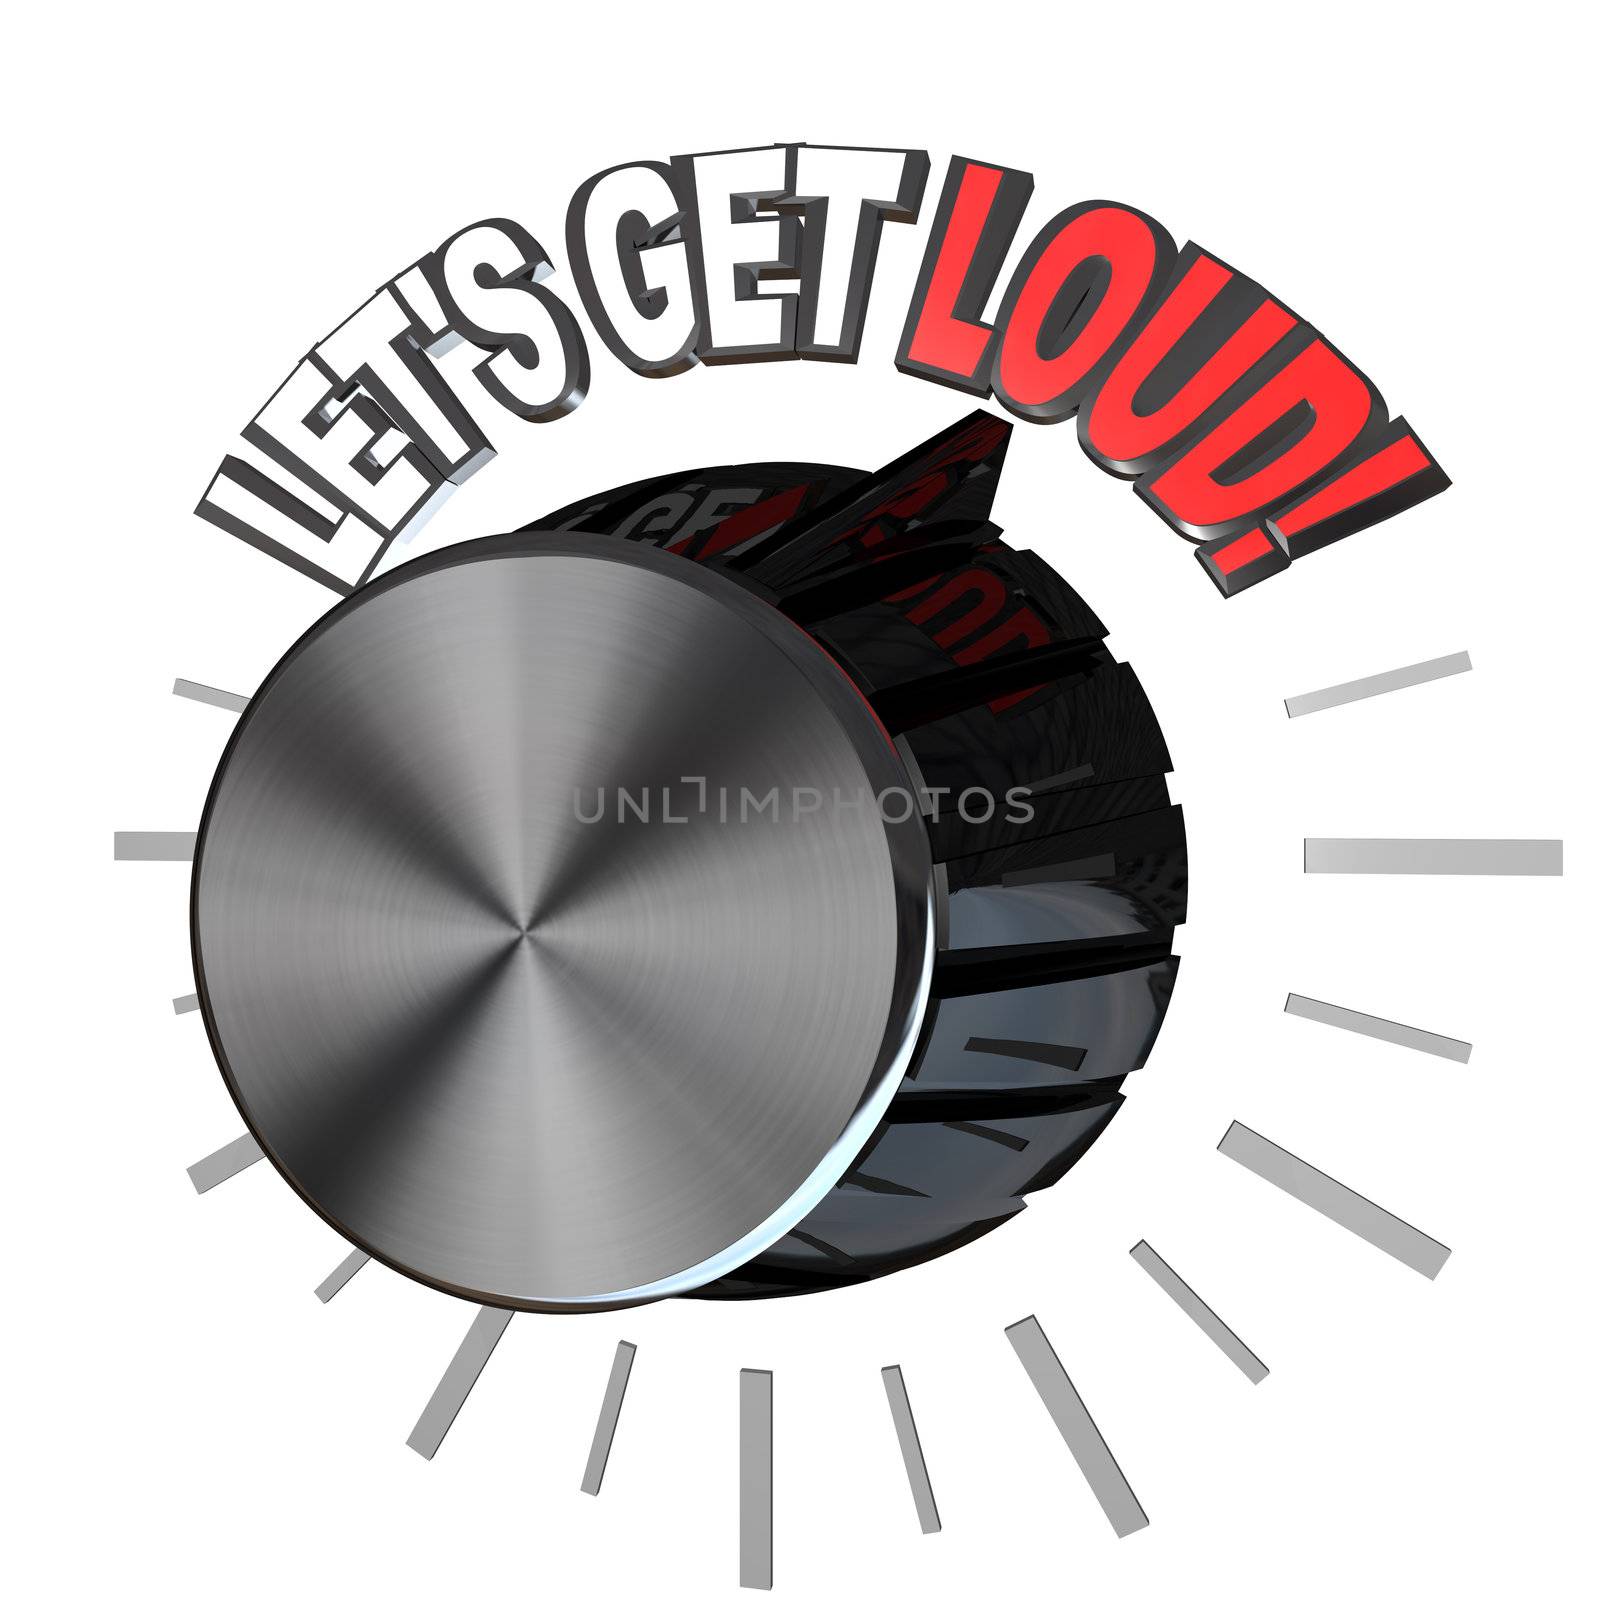 Let's Get Loud Volume Knob Turned to Highest Level by iQoncept